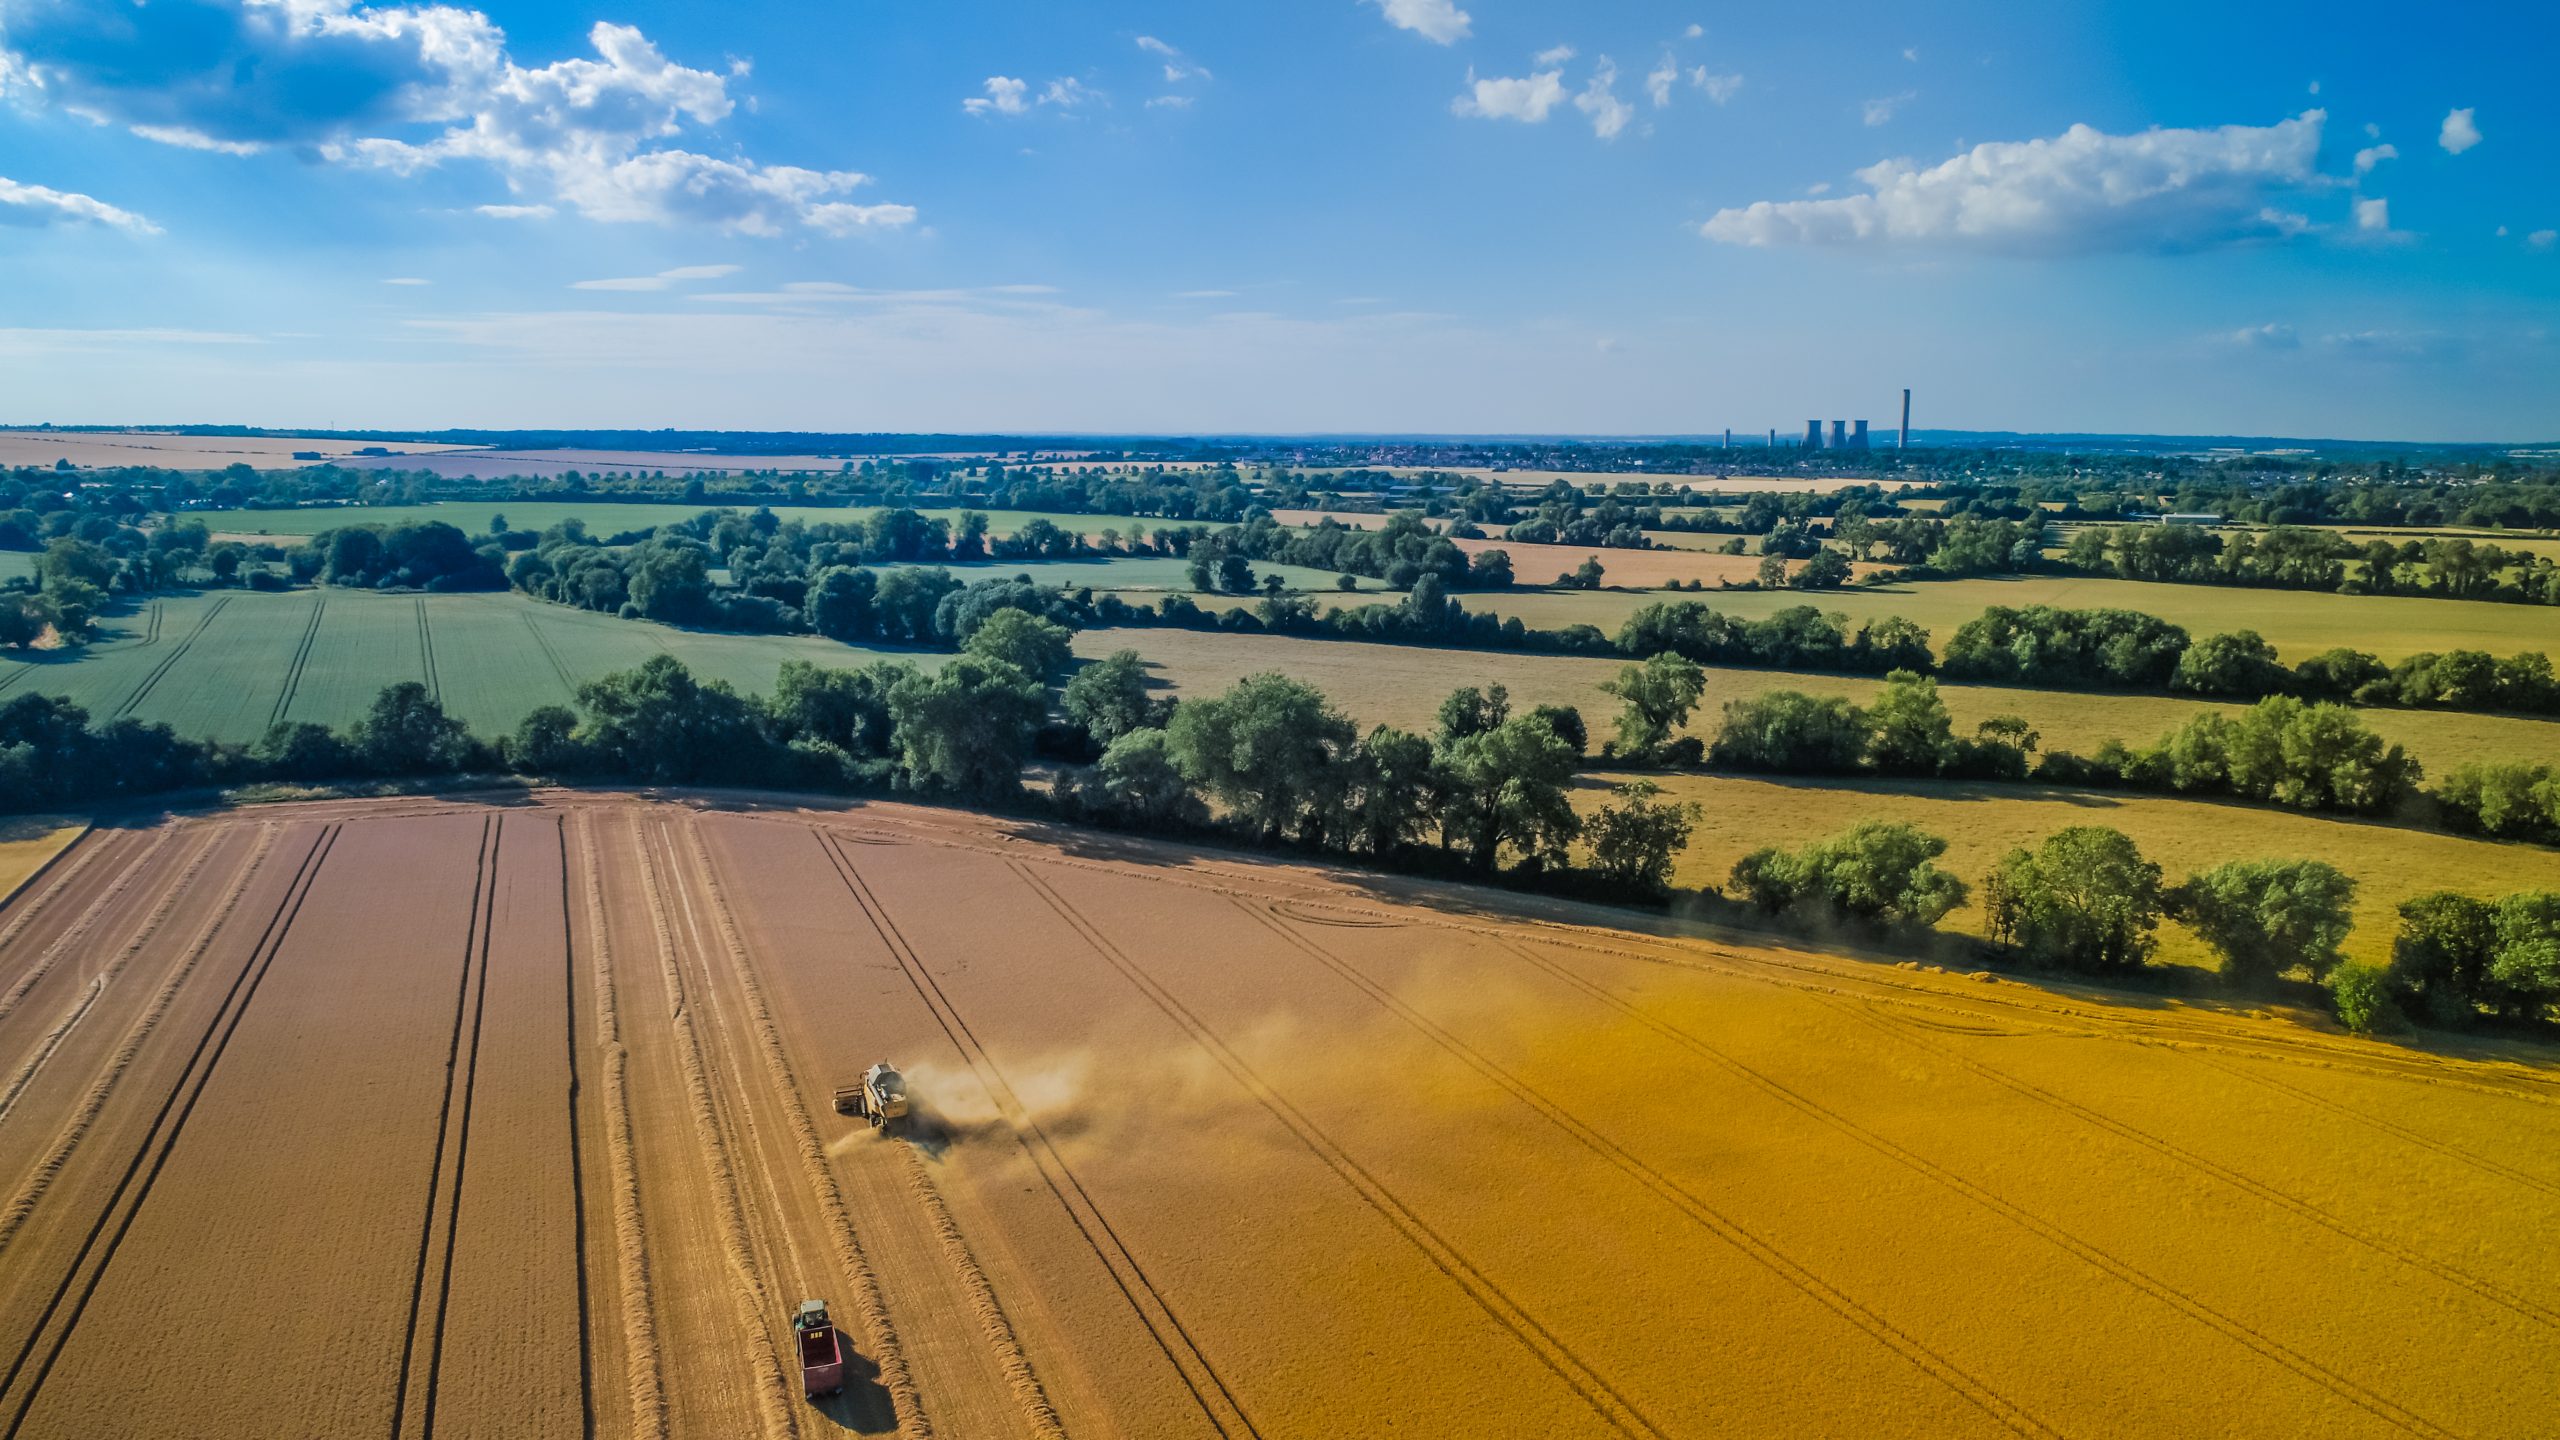 AD|ARC is working in partnership with Government, Academia, Farming Unions, Associations and Charities to deliver a safe, secure and valuable industry resource